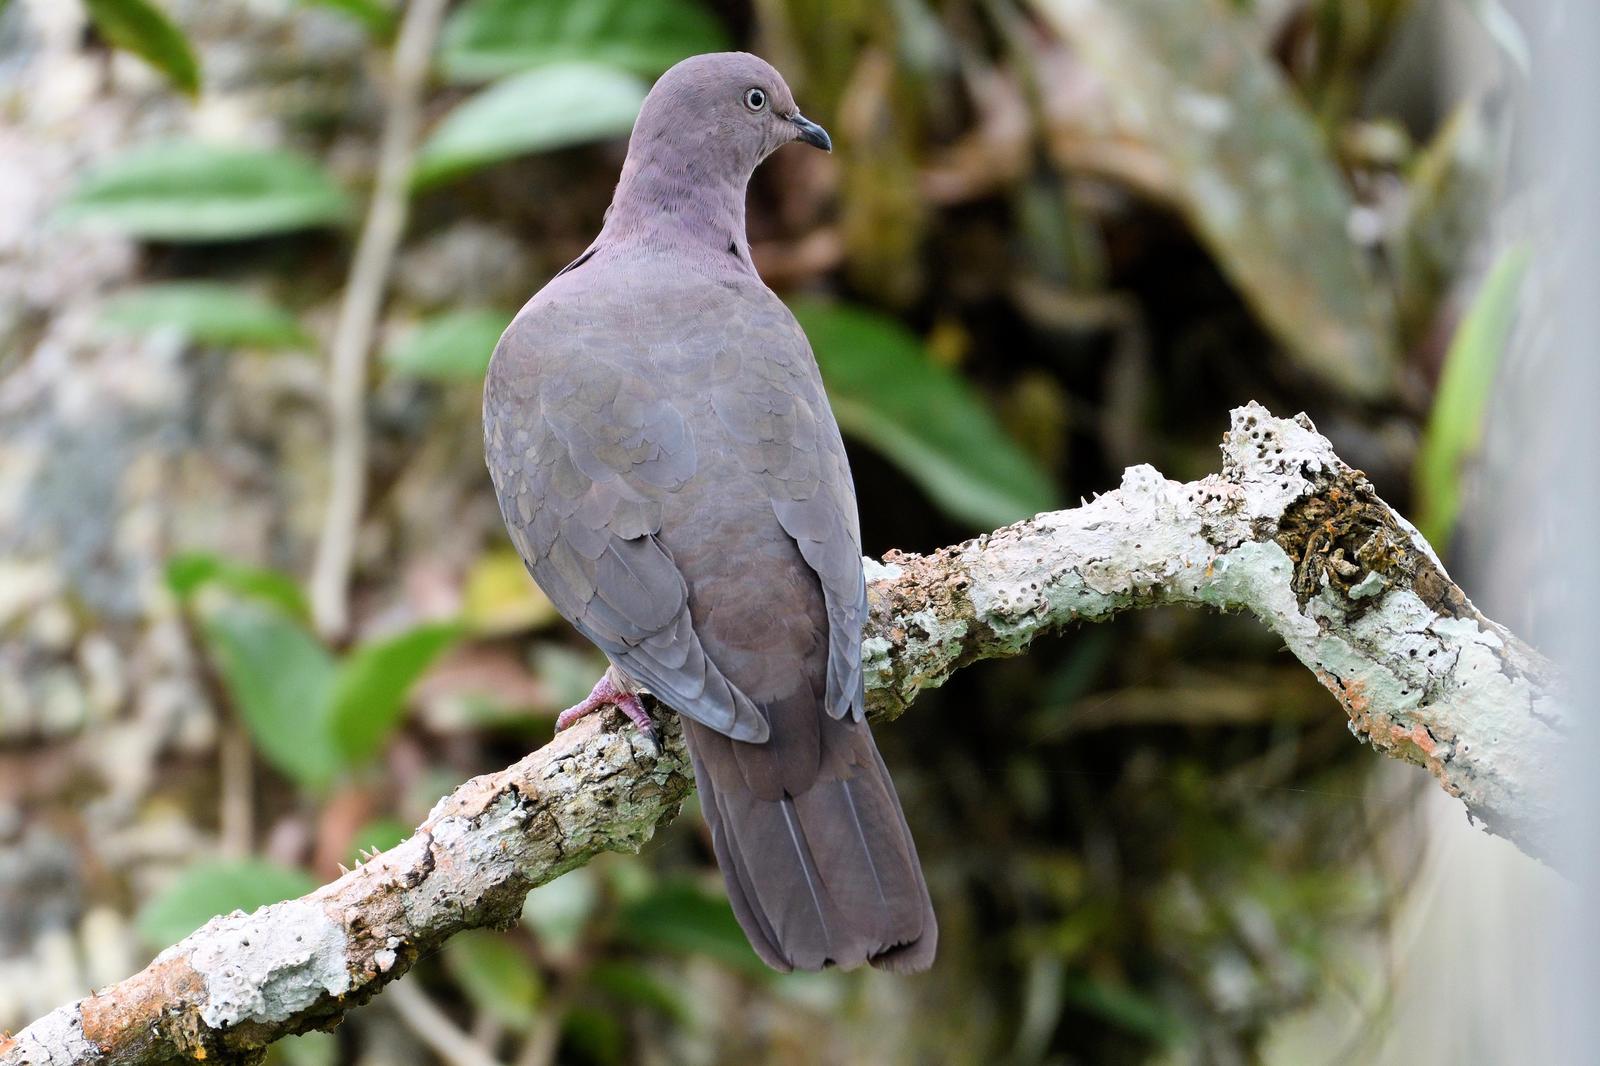 Plumbeous Pigeon Photo by Ann Doty